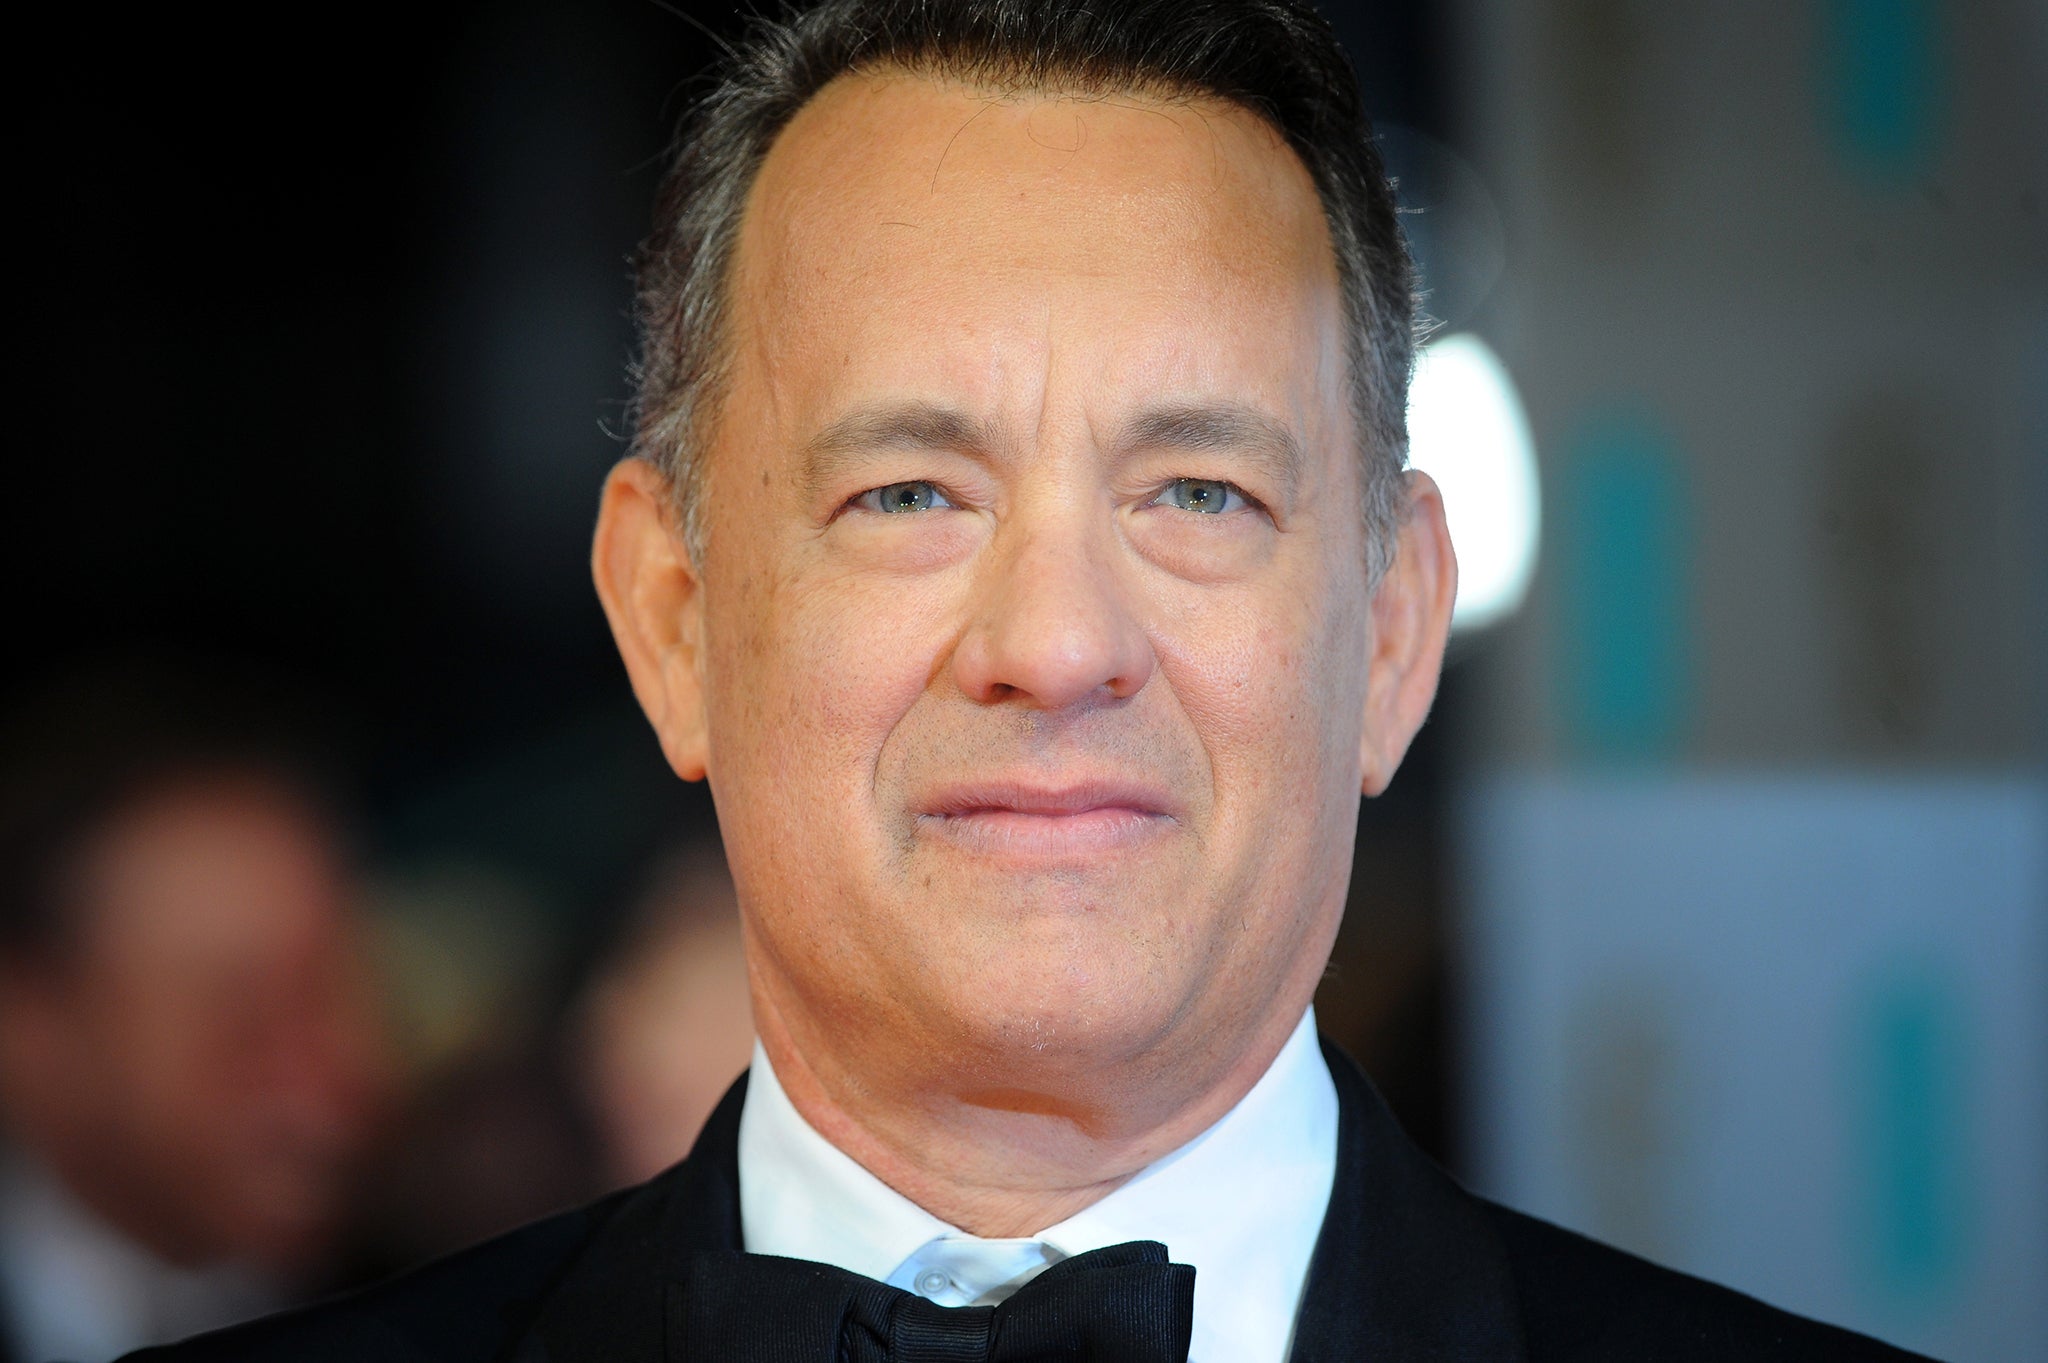 Tom Hanks has won a book deal for a collection of short stories